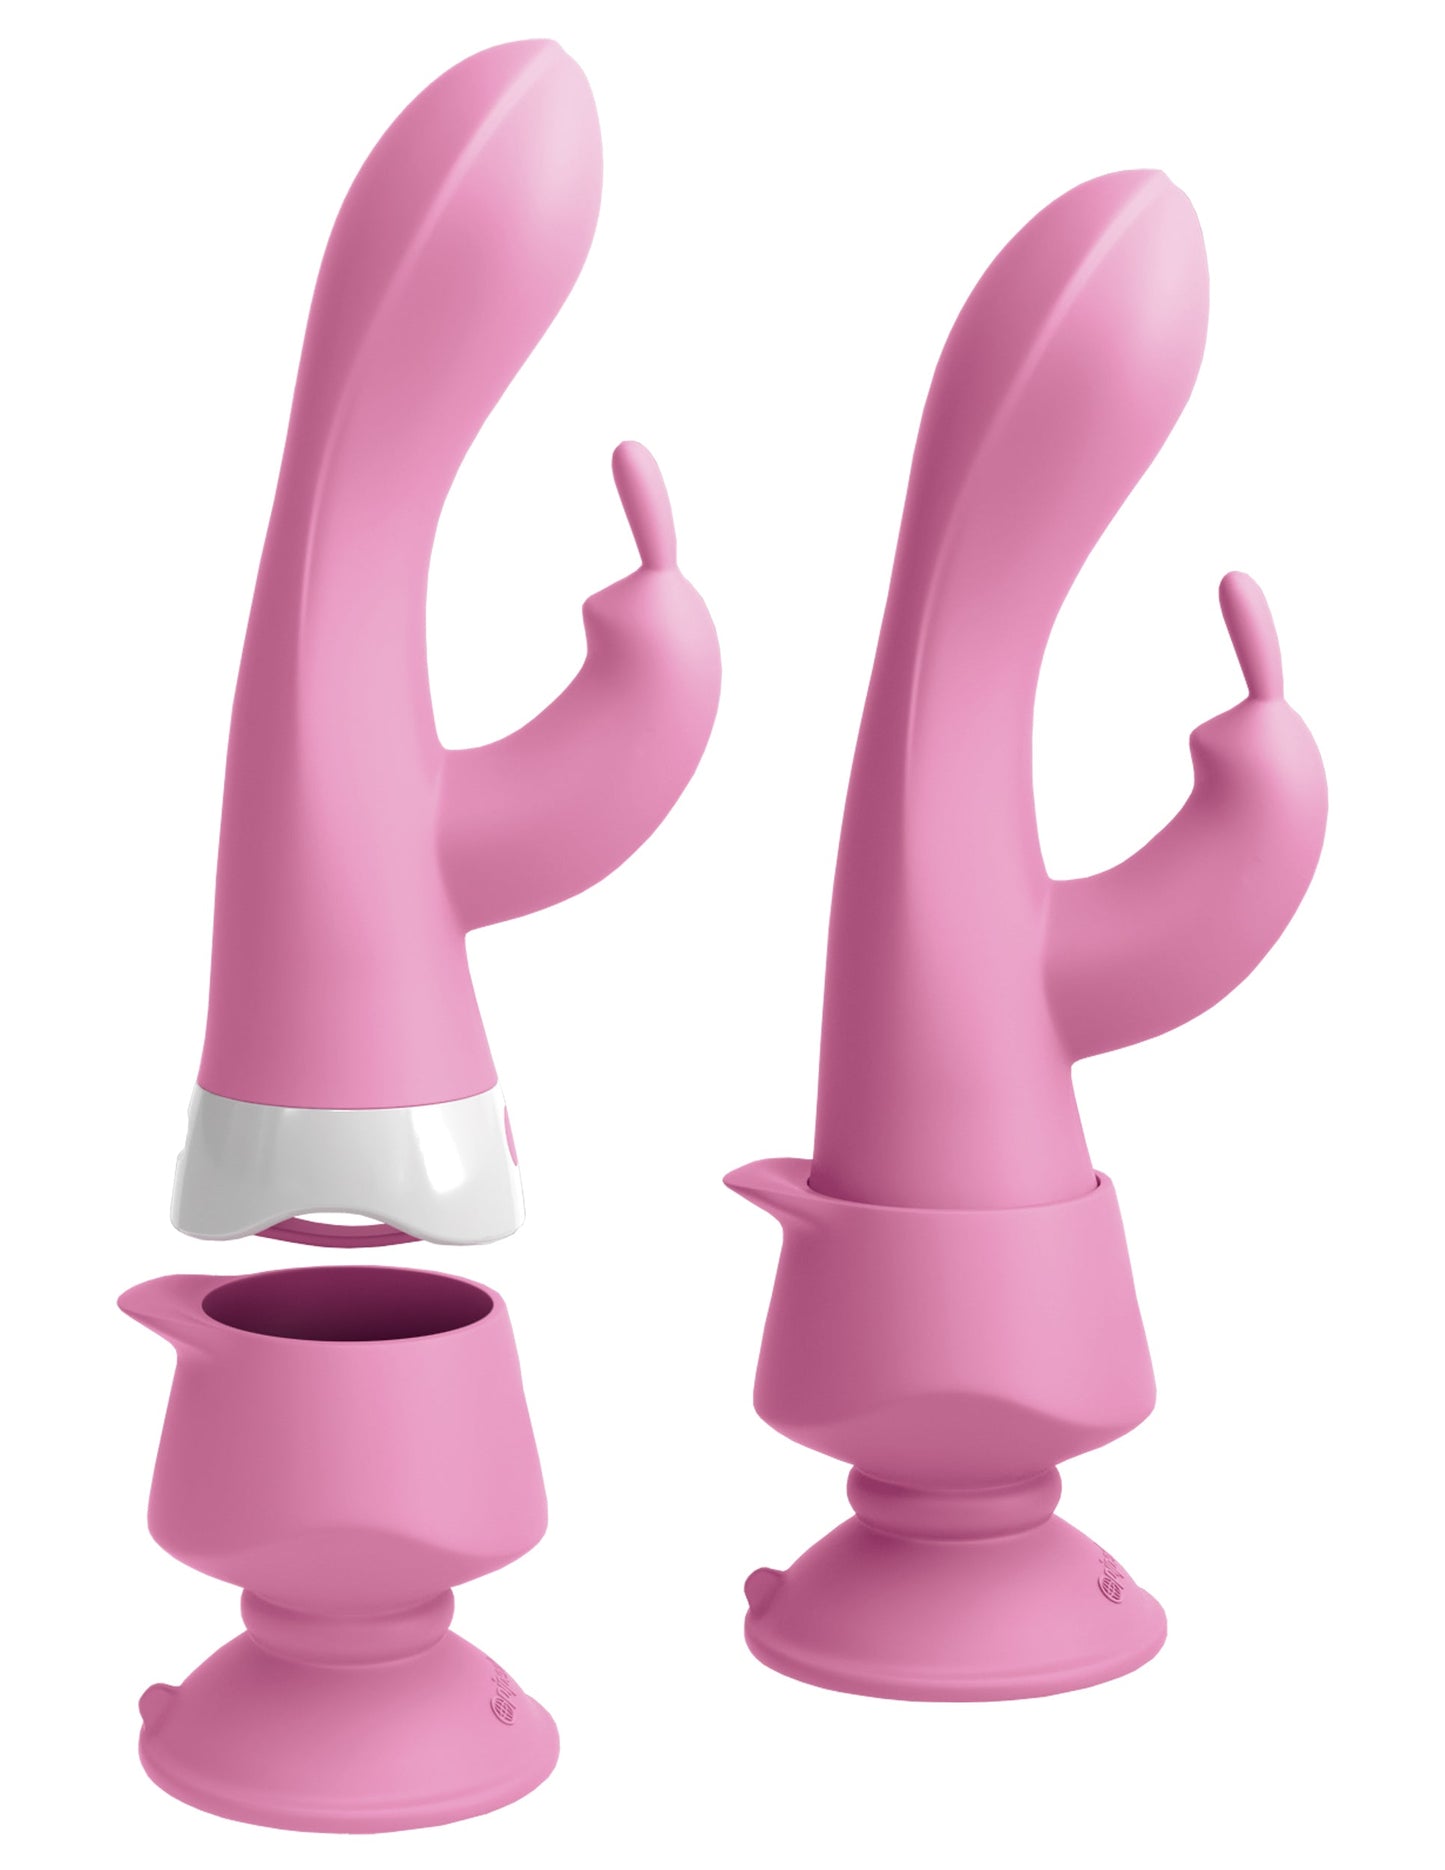 3Some Wall Banger Rabbit Silicone Vibrator USB Rechargeable Wireless Remote by Pipedream